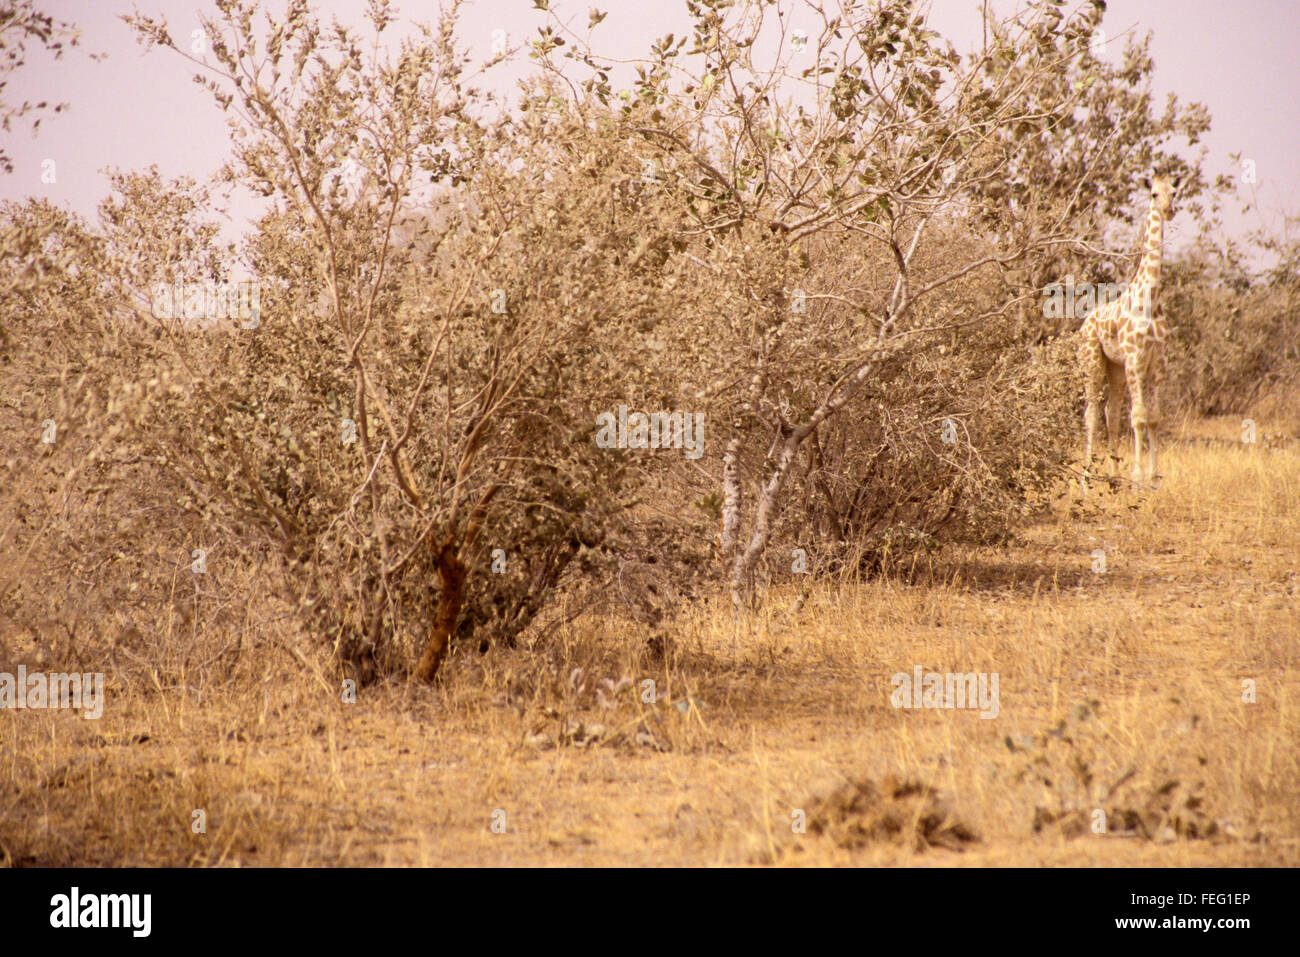 Niger. Young Giraffe.  Colors blend into semi-arid vegetation and haze of  Sahel landscape, providing natural camouflage. Stock Photo